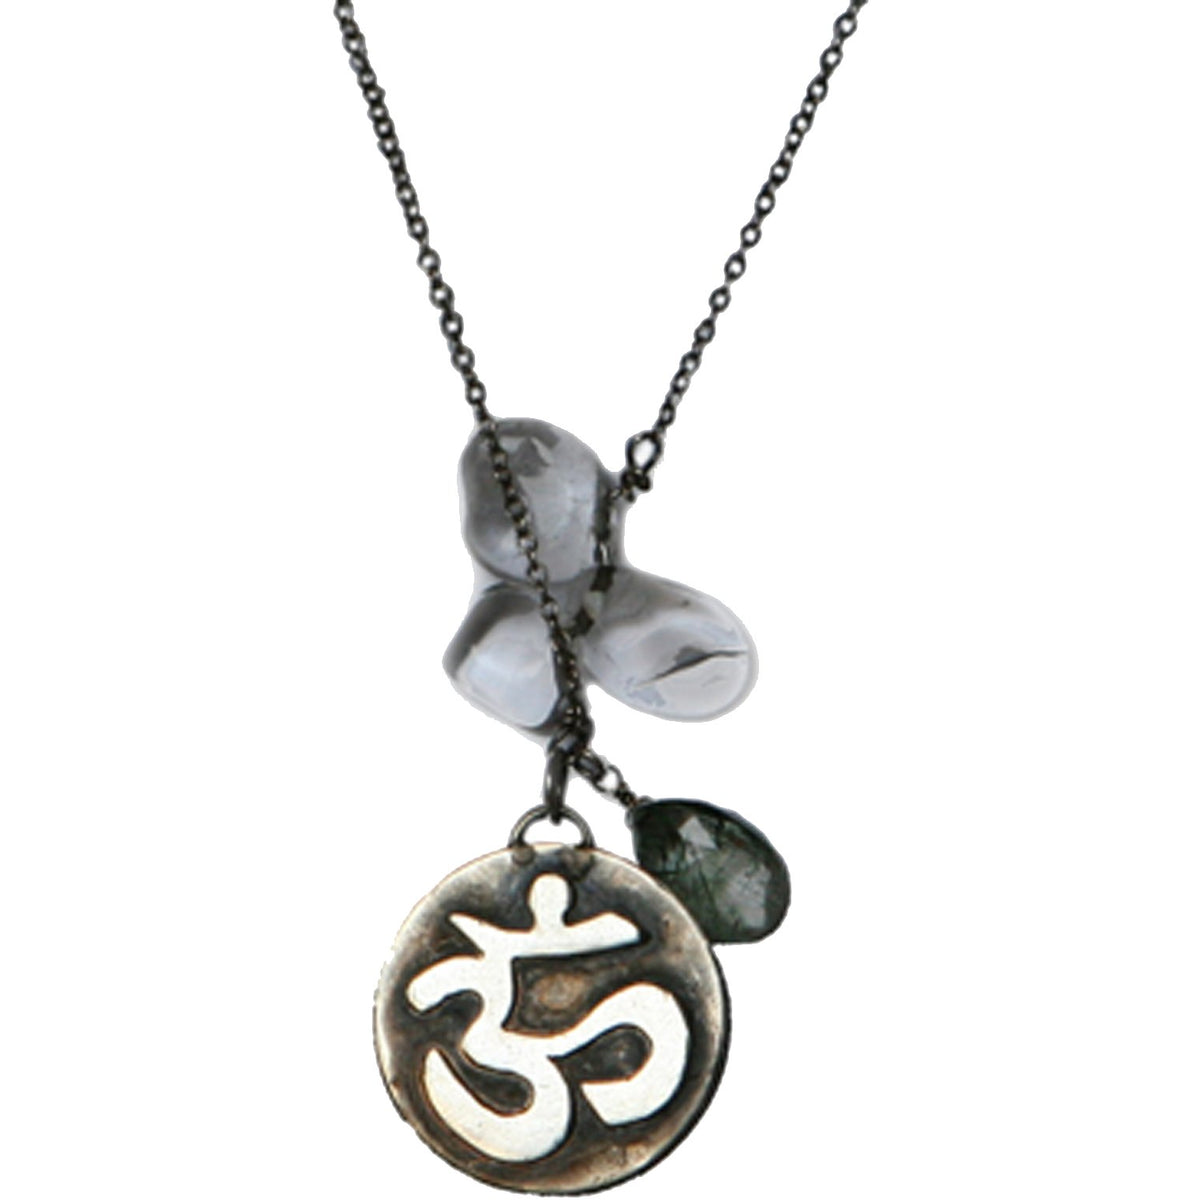 Antique Silver Ohm Meditation Necklace with Crystals